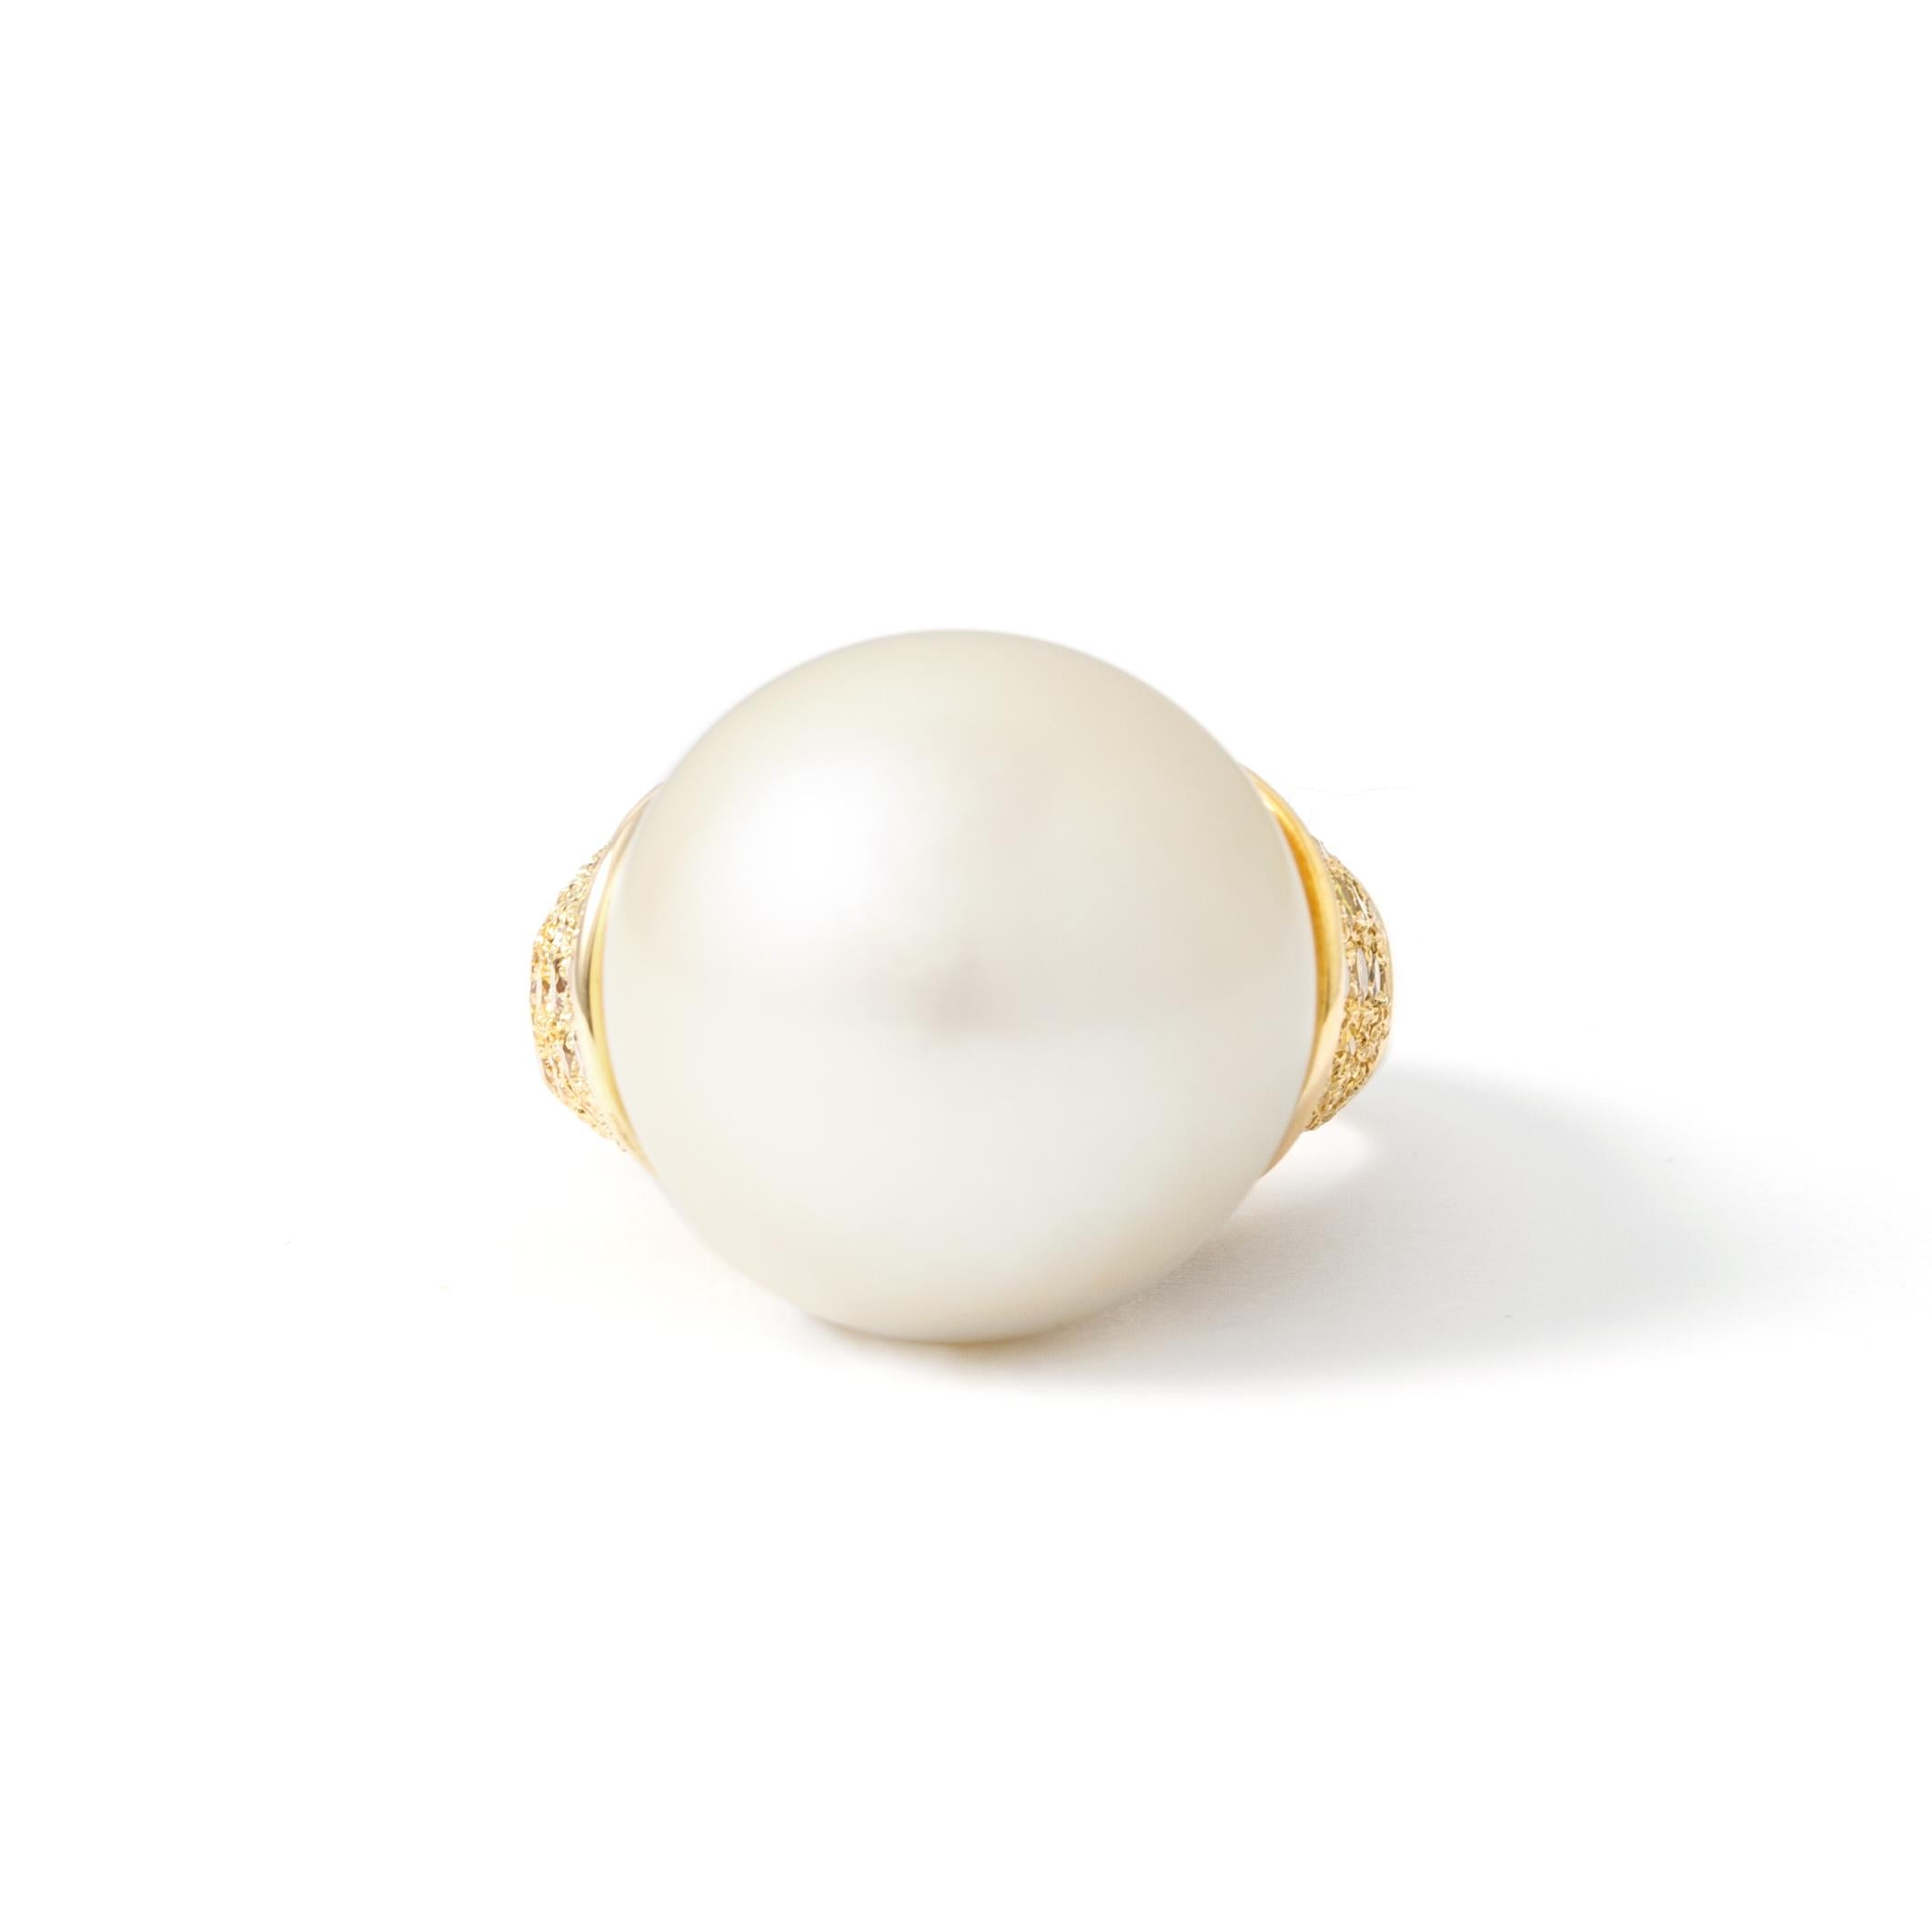 Ring in 18kt yellow gold set with one pearl 16.50 mm and yellow diamonds 1.04 cts Size 52          

Total weight: 14.49 grams